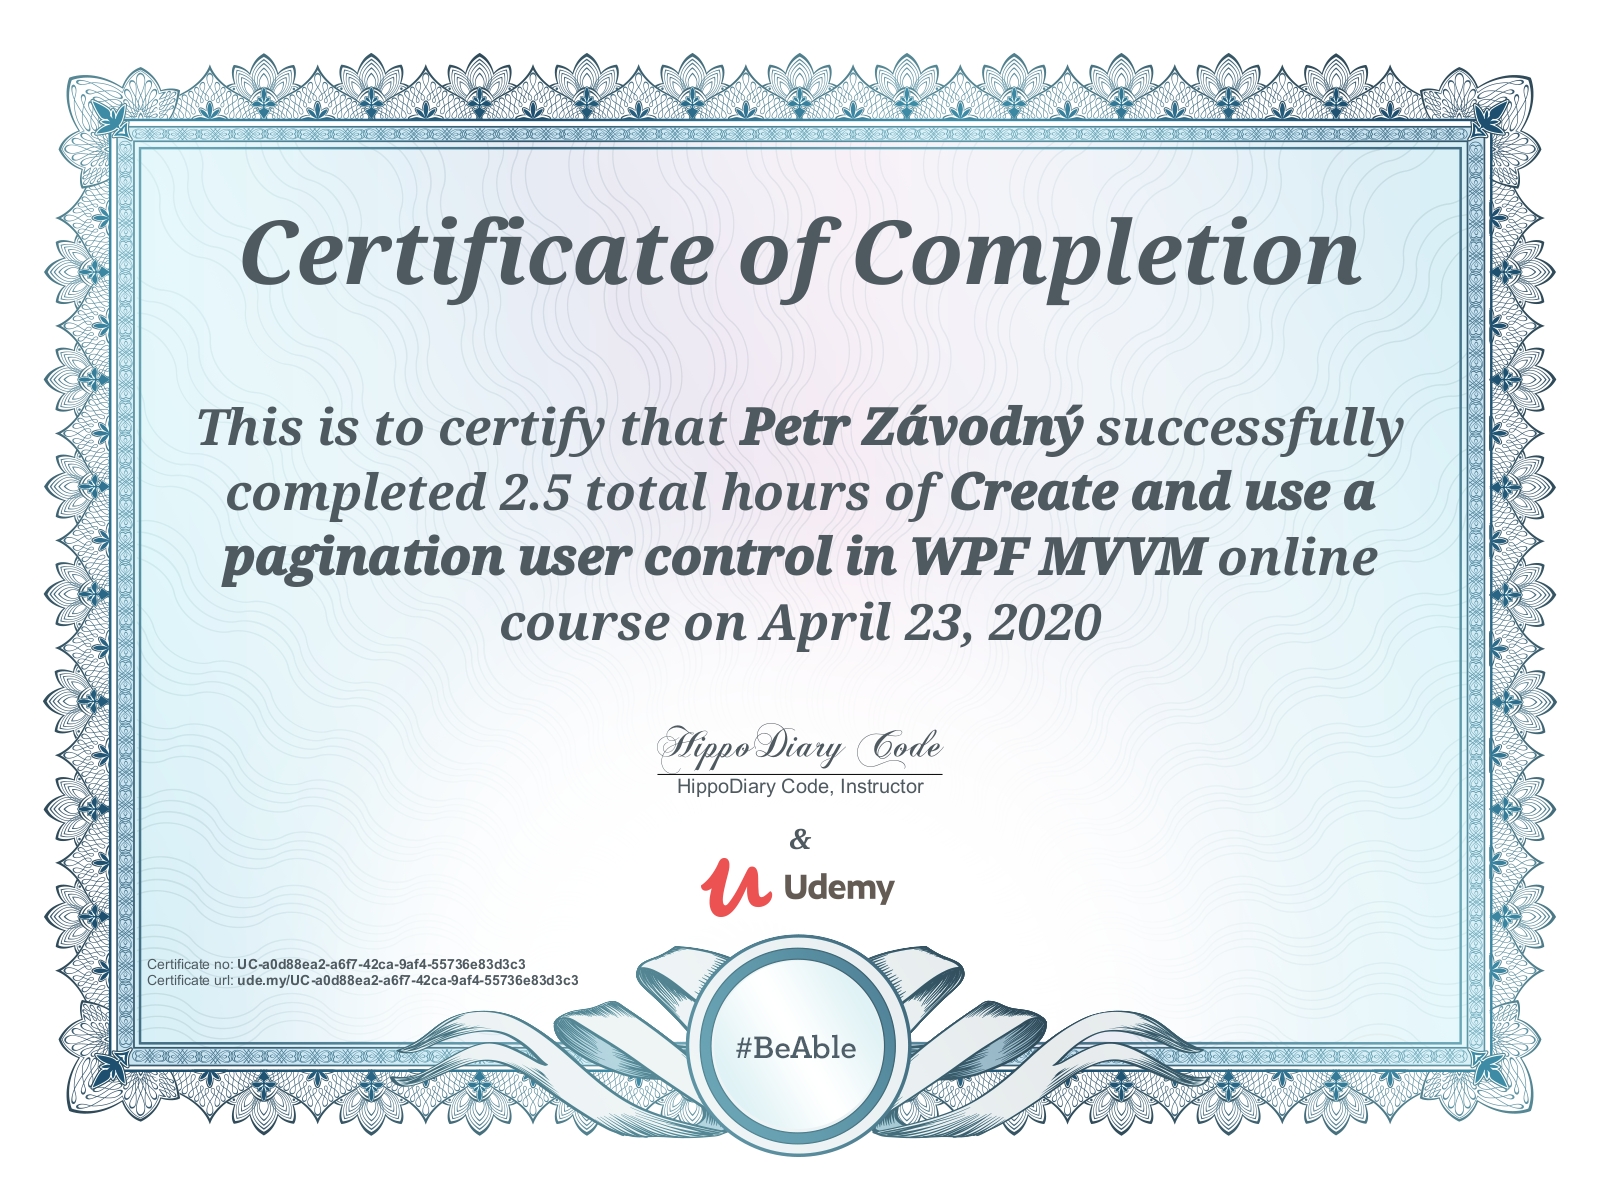 WPF and MVC Pagination Control Course Certificate